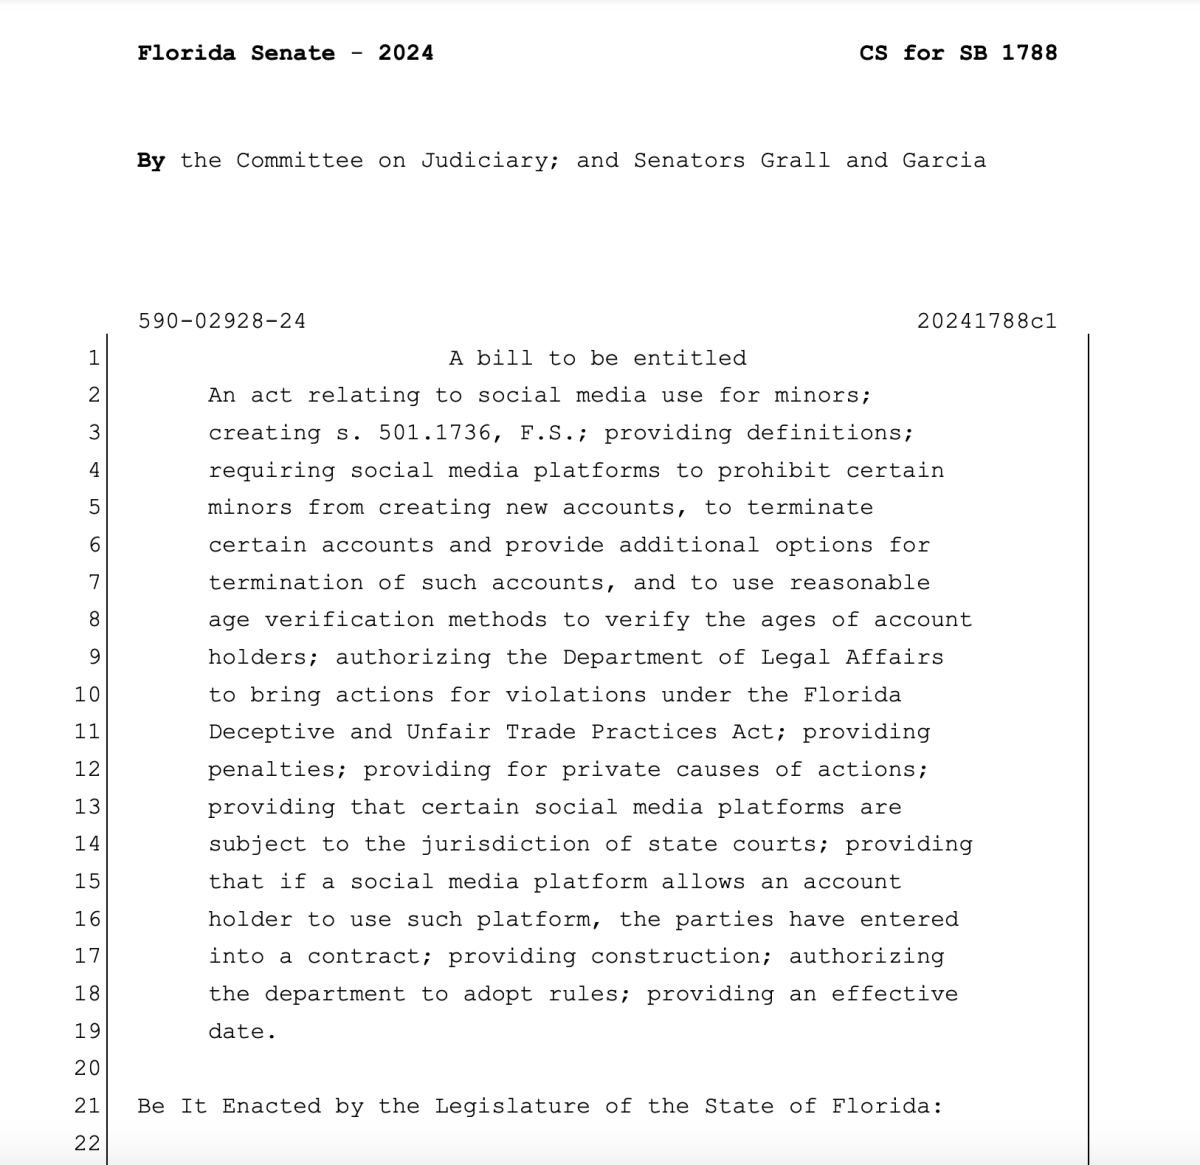 Bill SB 1788, which is commonly referred to as the Social Media Bill in this article. Accessed via the Florida Senate website.